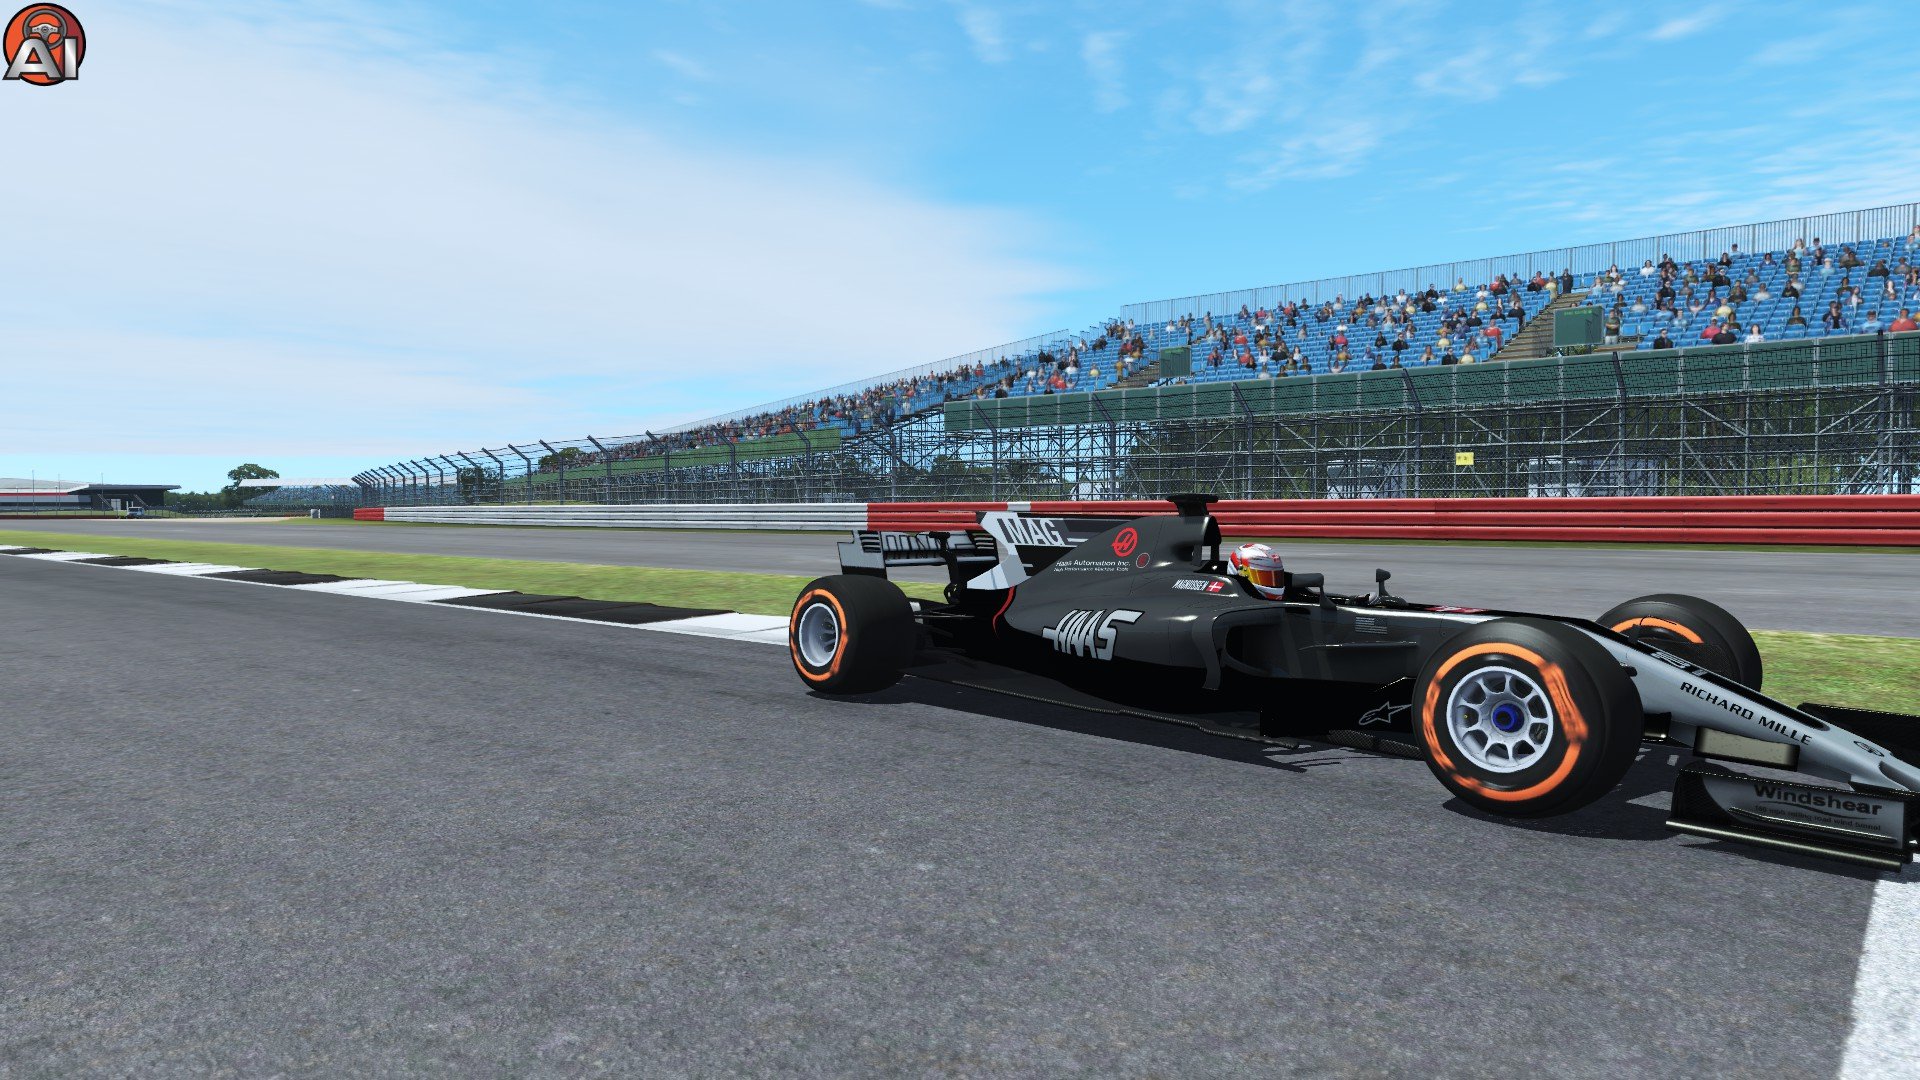 More information about "rFactor 2: F1 2017 Season v1.0 by ACFL - Apex"